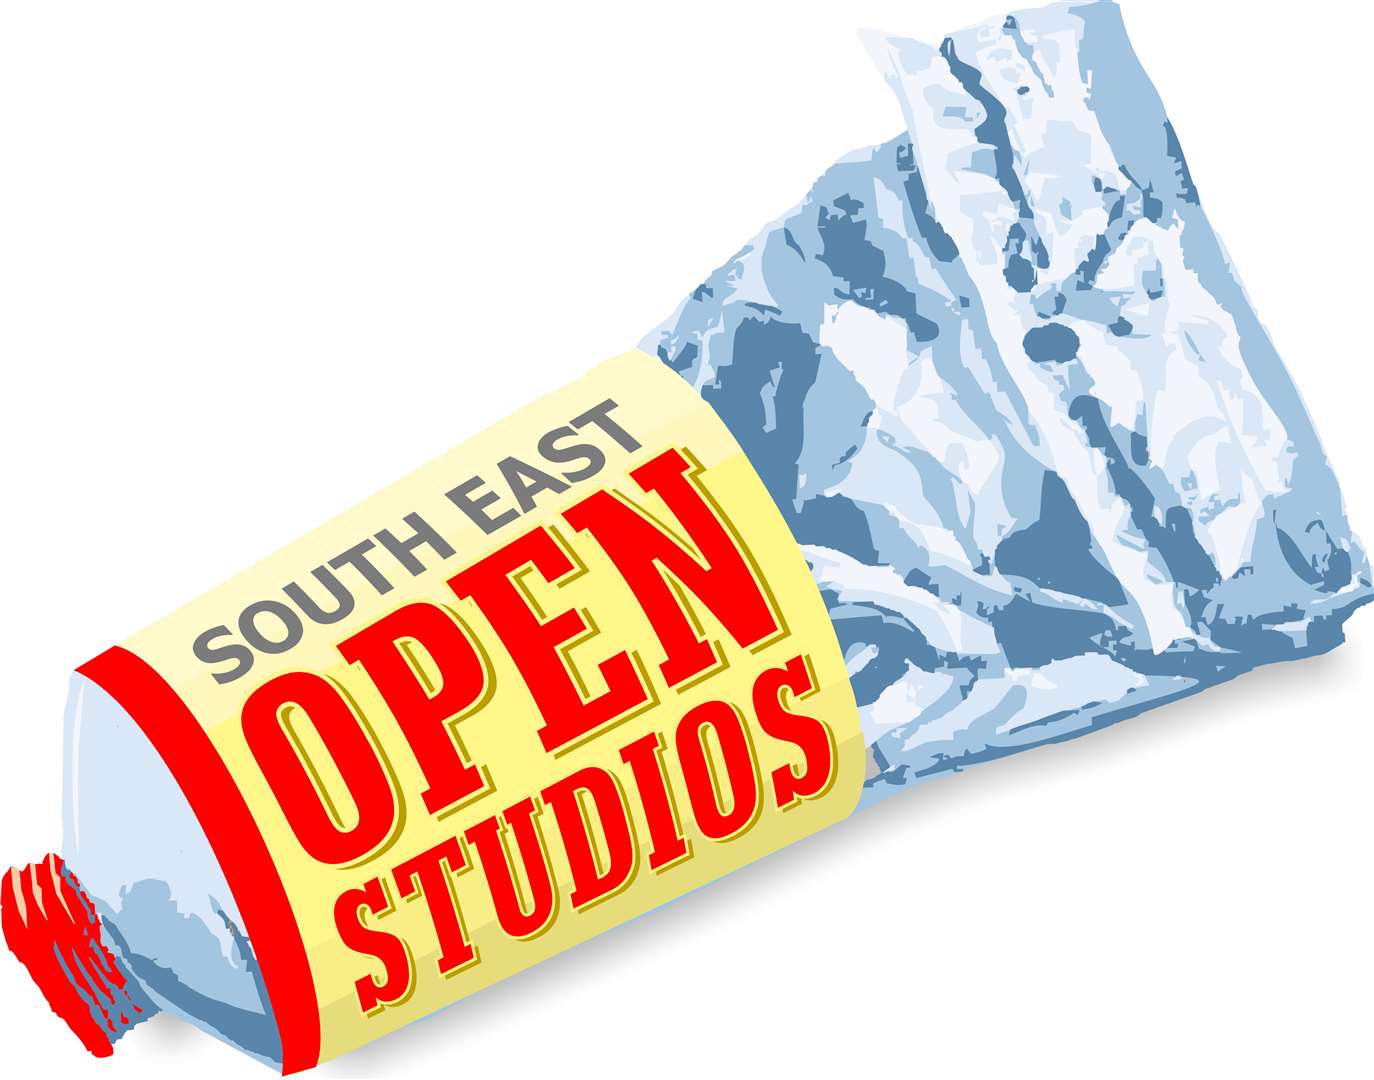 South East Open Studios will showcase art across the county